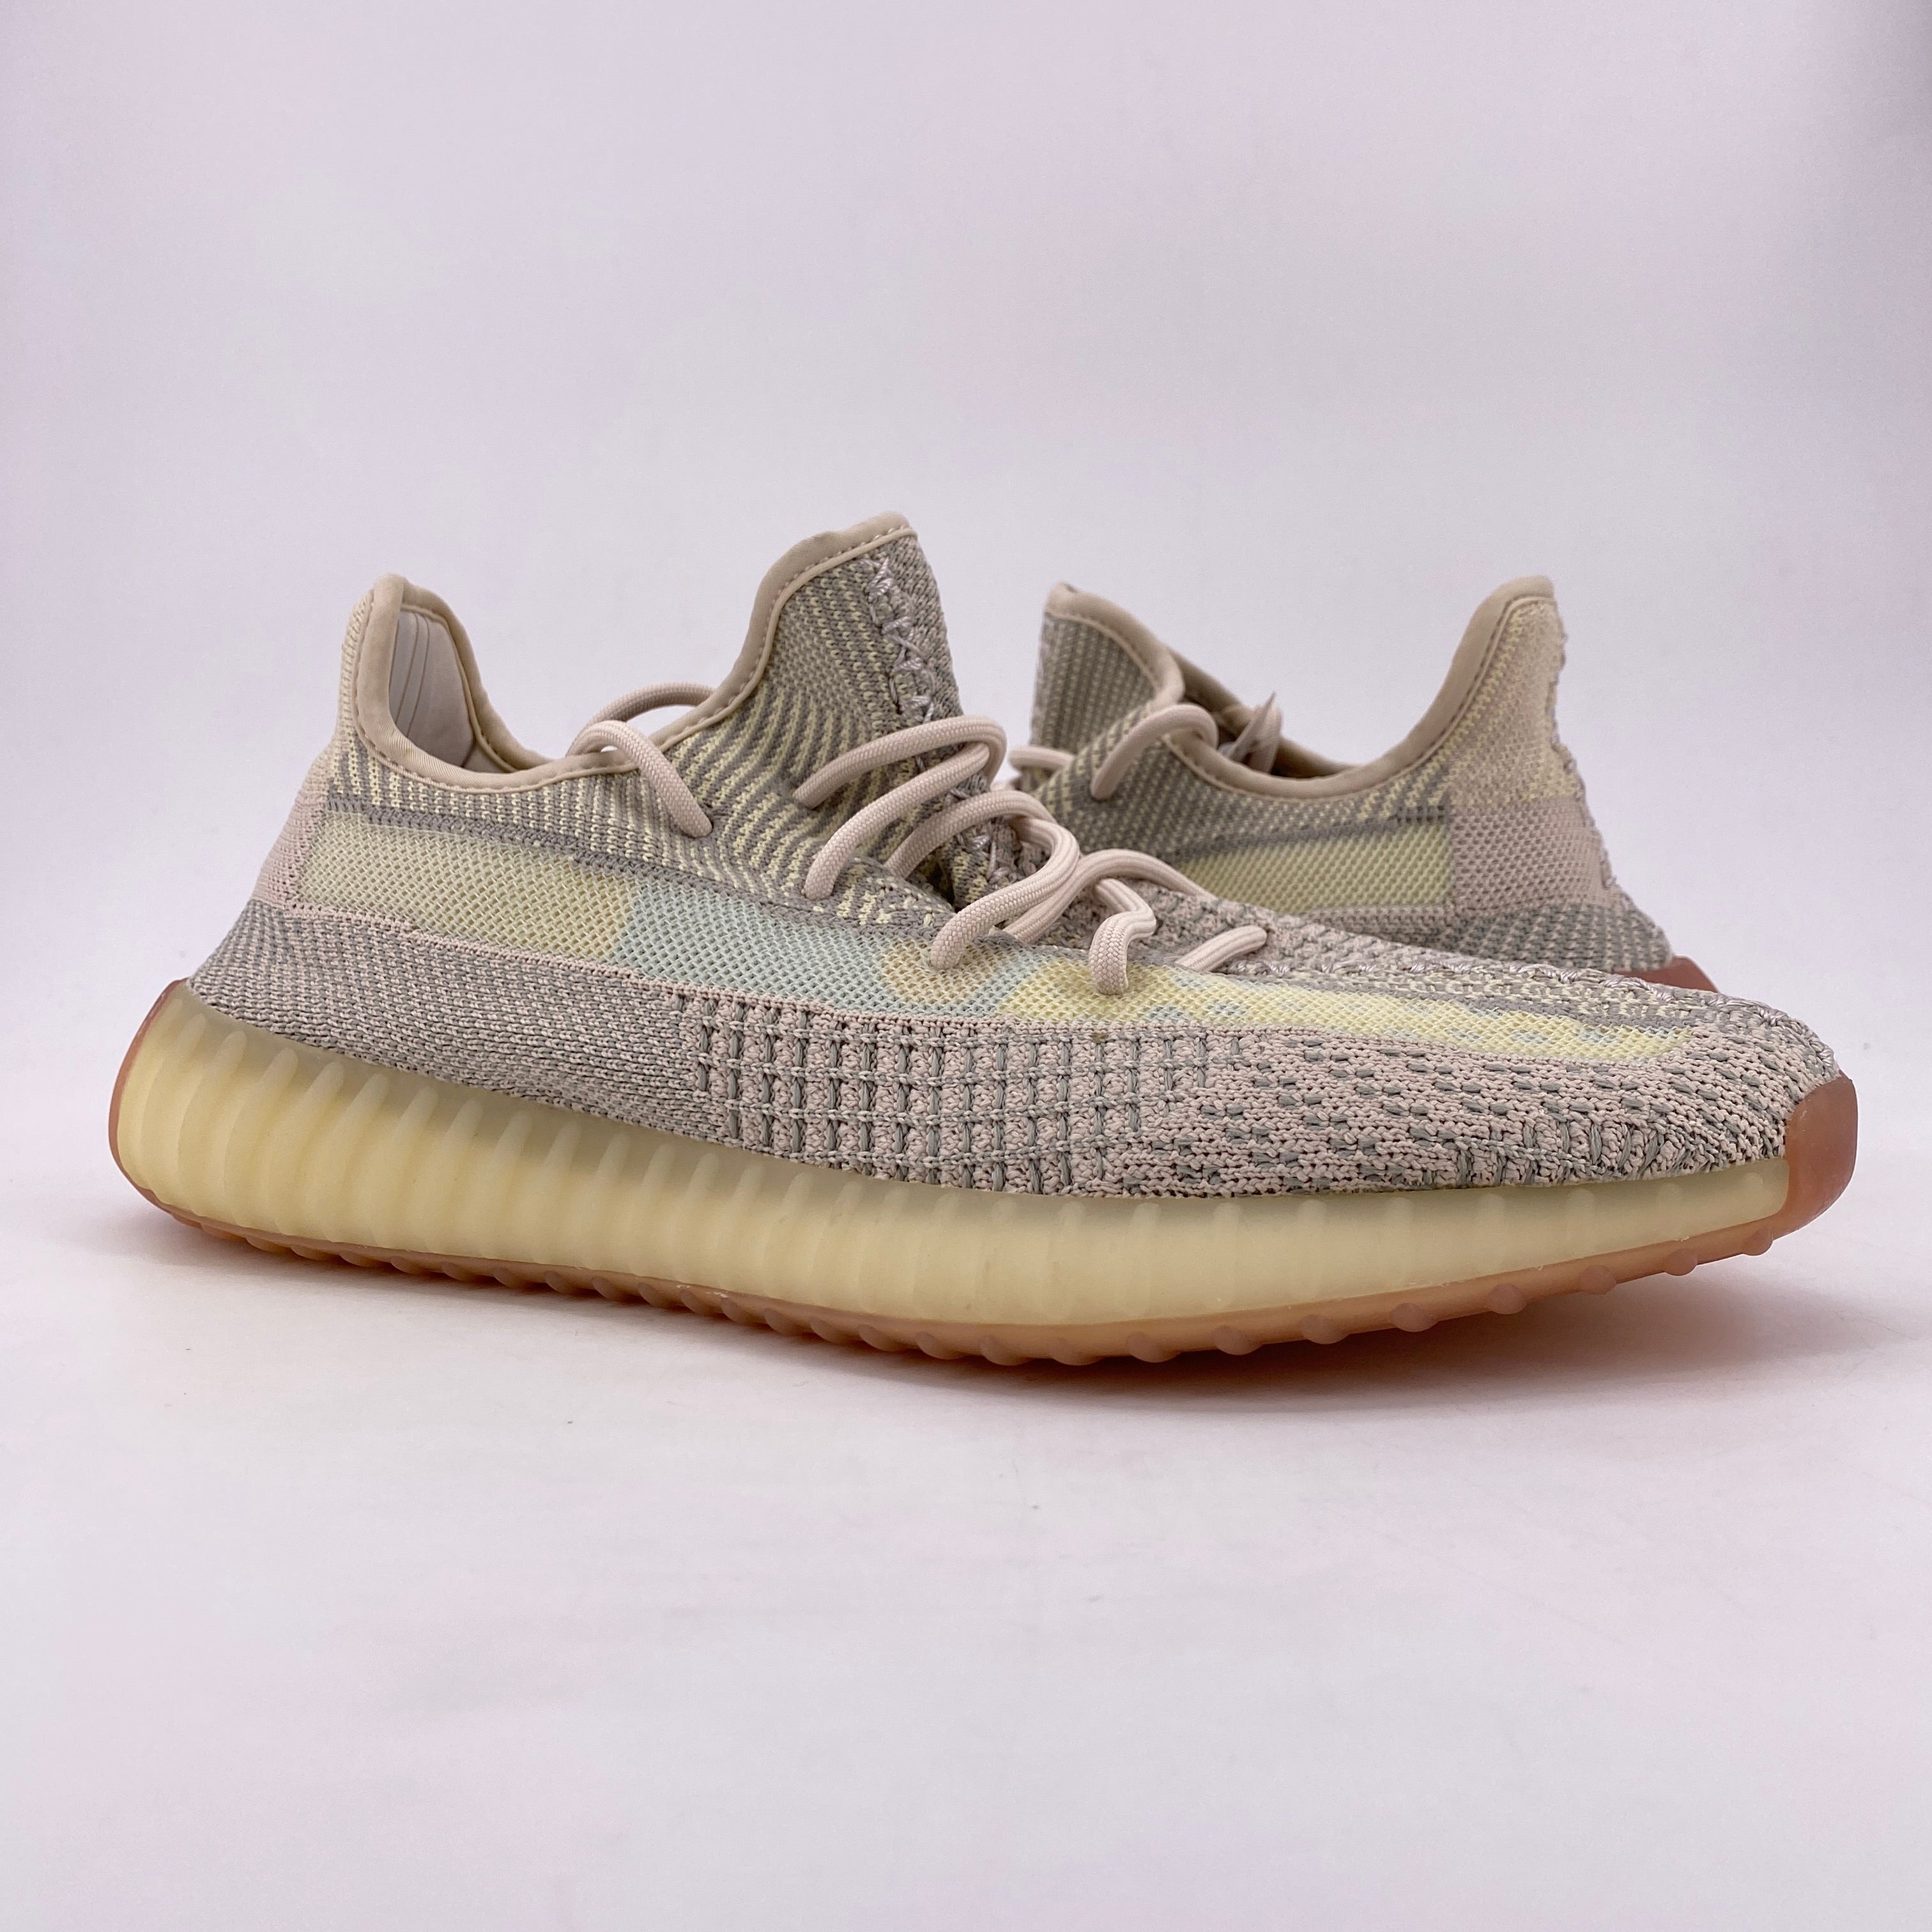 Yeezy 350 v2 &quot;Citrin&quot; 2019 New Size 11